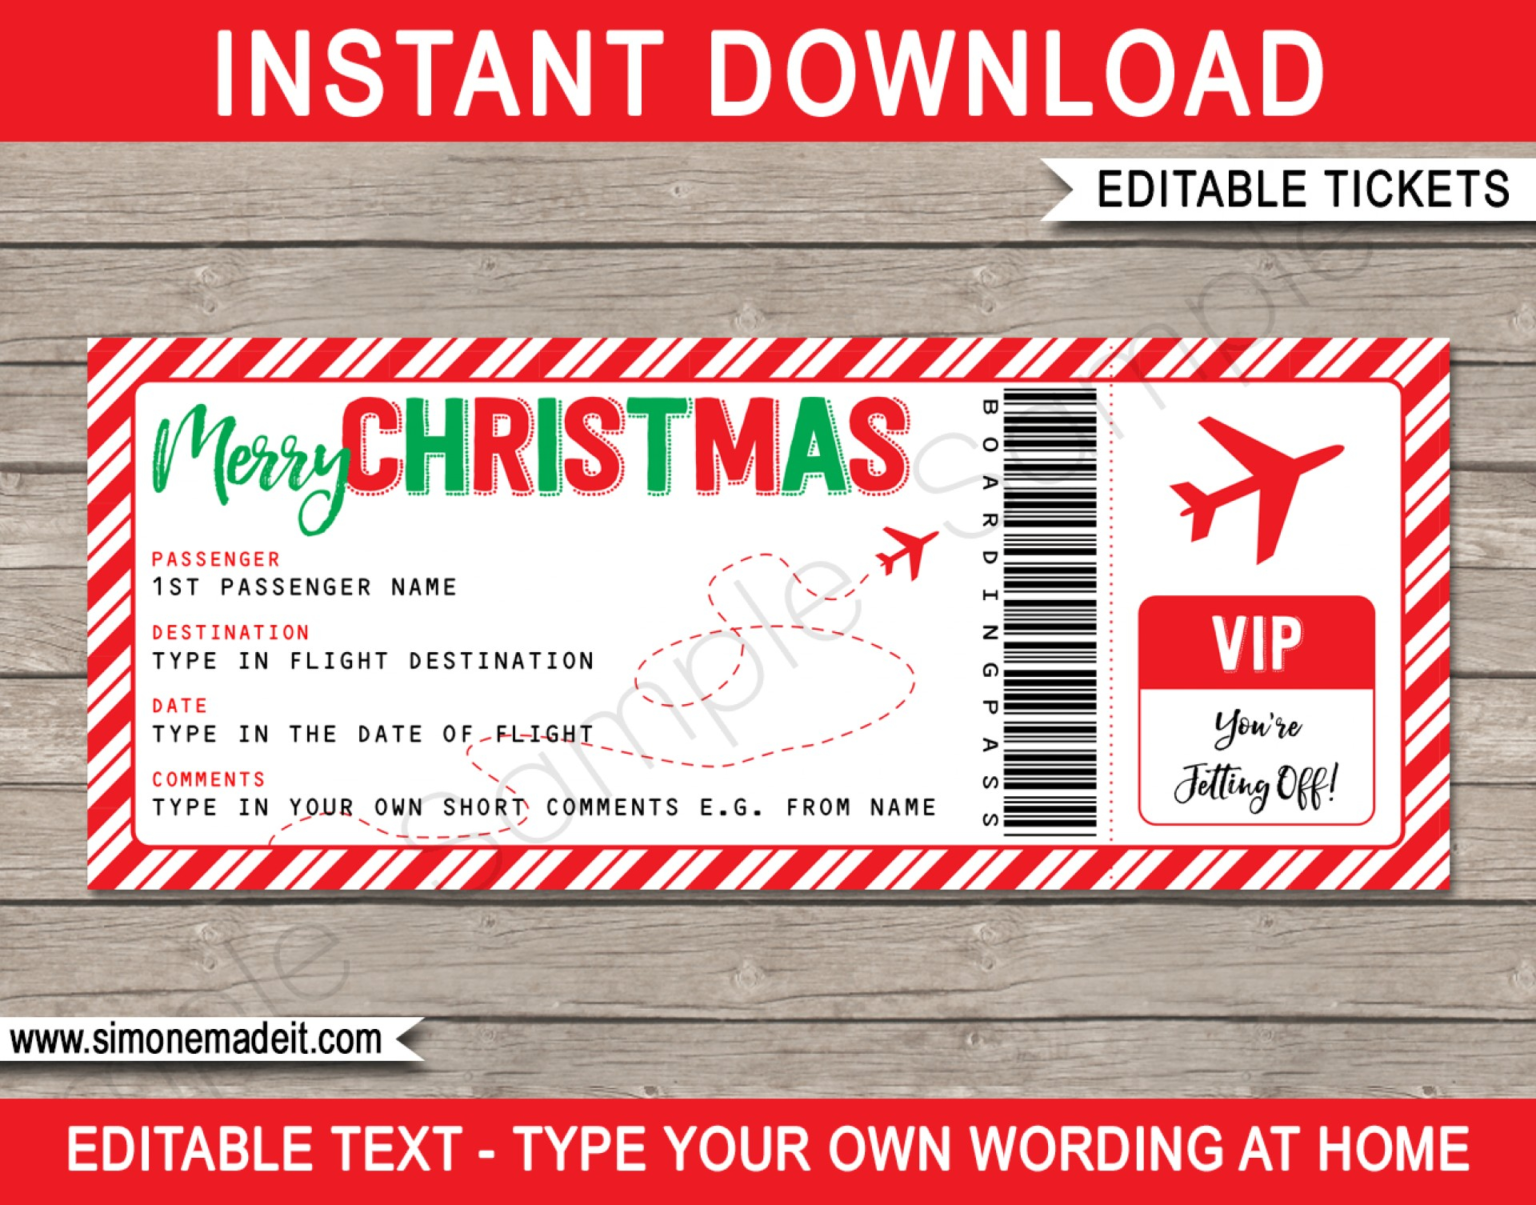 Airline Ticket Template For Gift